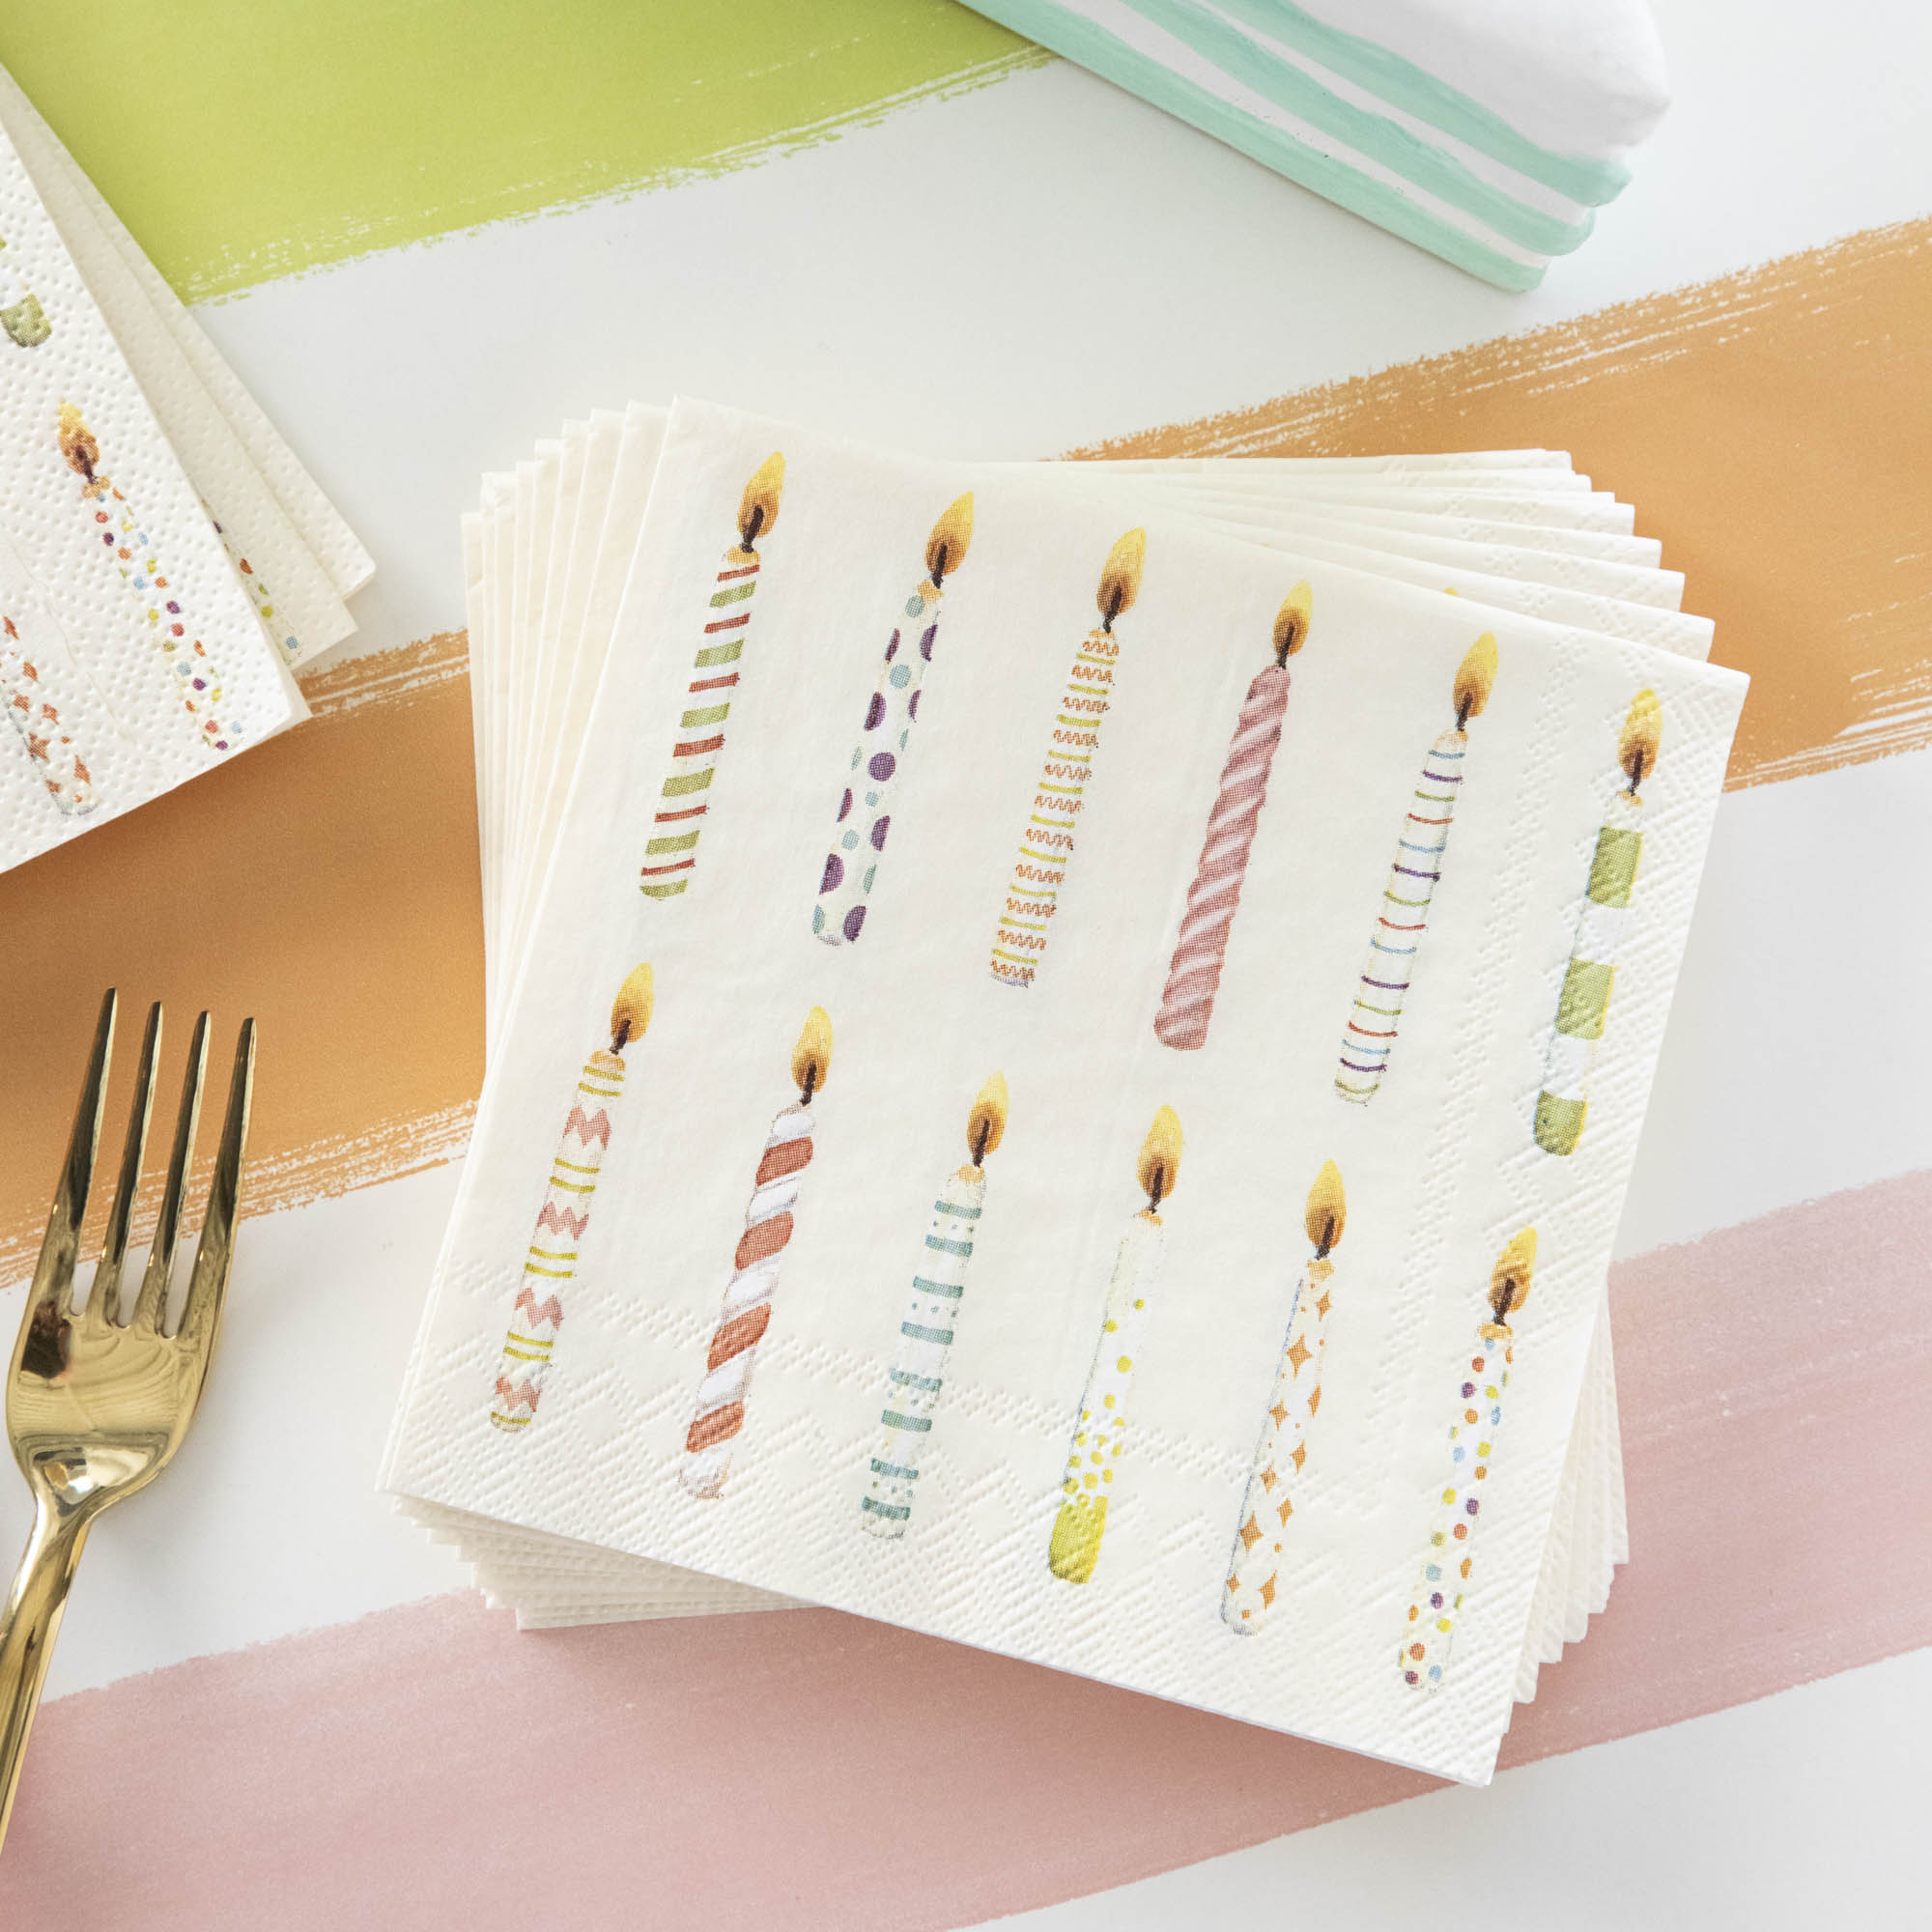 These Birthday Candles Napkins, designed by Hester &amp; Cook, feature adorable candles, making them the perfect addition to any birthday celebration.